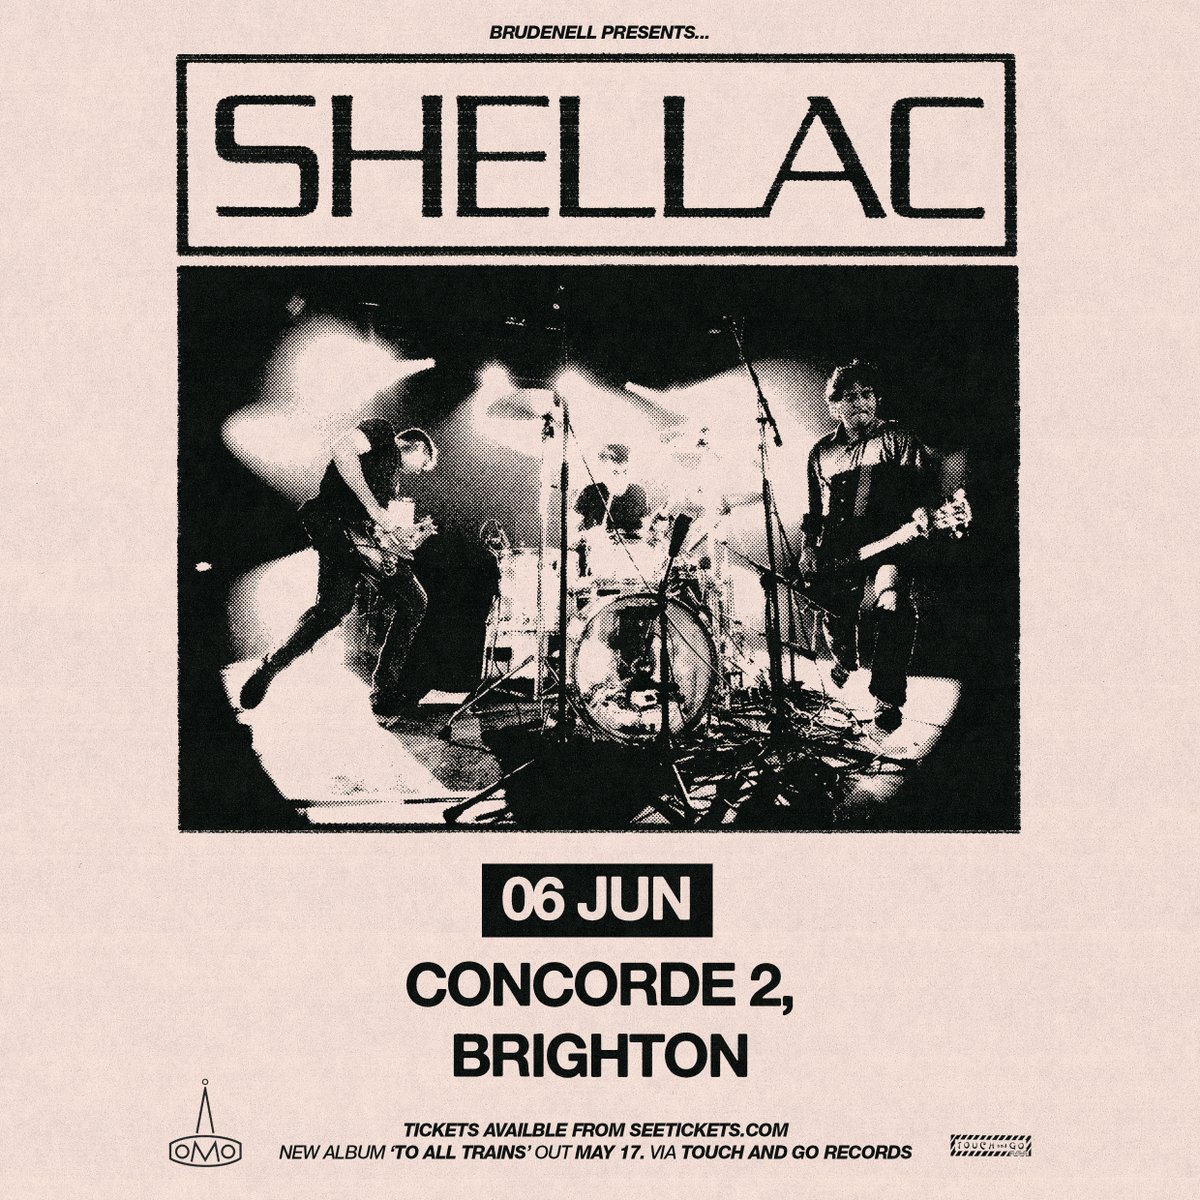 💥💥 Selling Fast 💥💥 Tickets for SHELLAC's return to C2 in June are now on sale and selling fast. With a new album and a tour, SHELLAC are really spoiling us this year! Grab your tickets from concorde2.co.uk